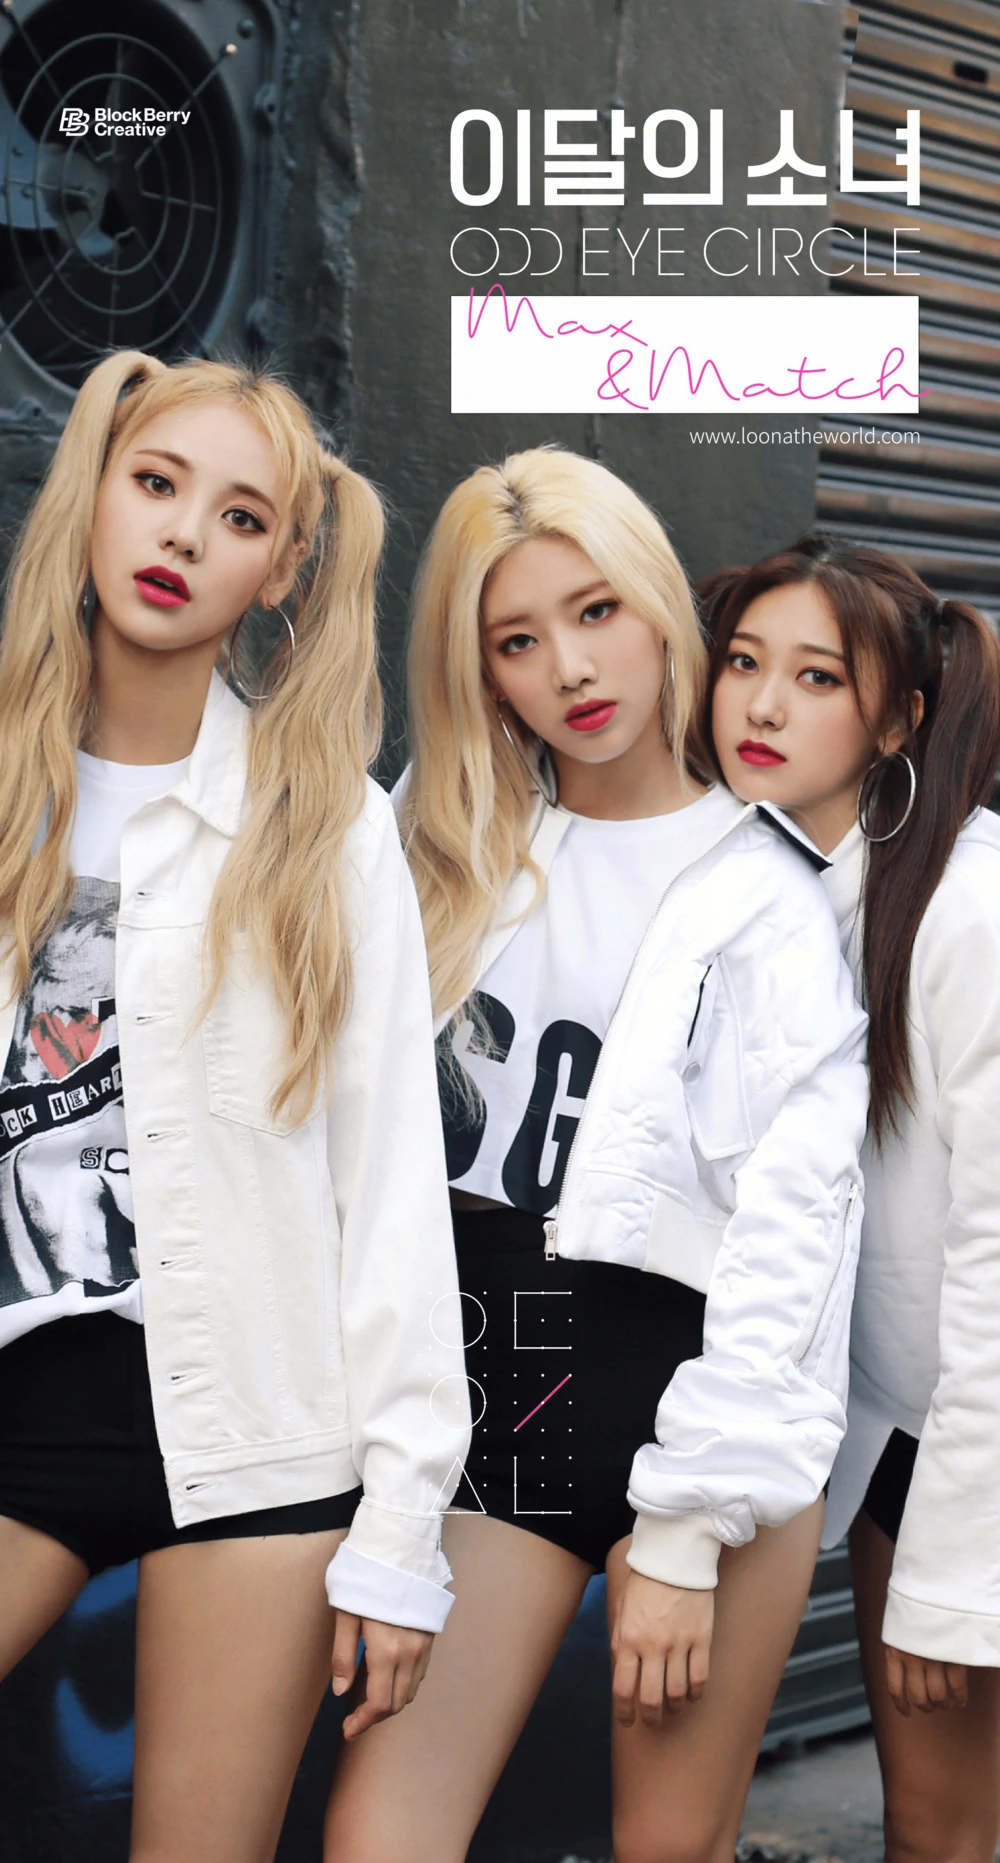 Loona OEC Odd Eye Circle Max & Match Group Concept Teaser Picture Image Photo Kpop K-Concept 2